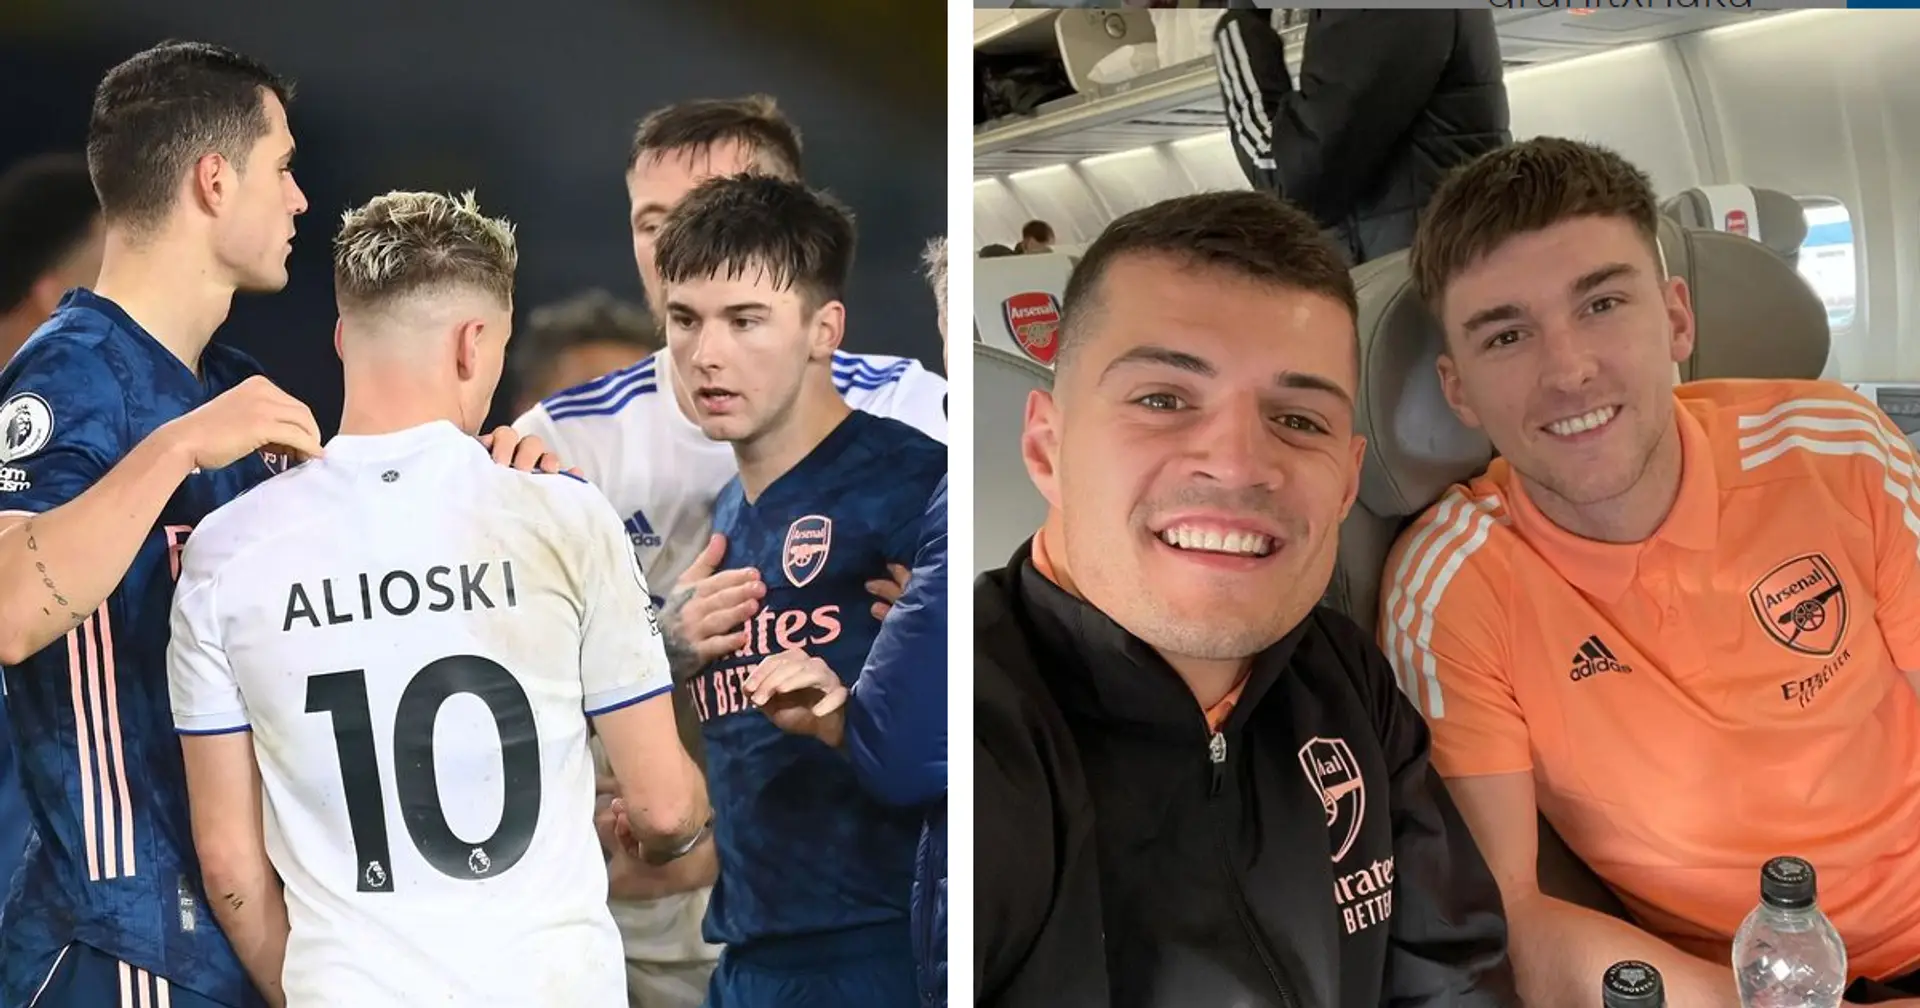 'No problems here': Xhaka rubbishes suggestions of Tierney row with Instagram post